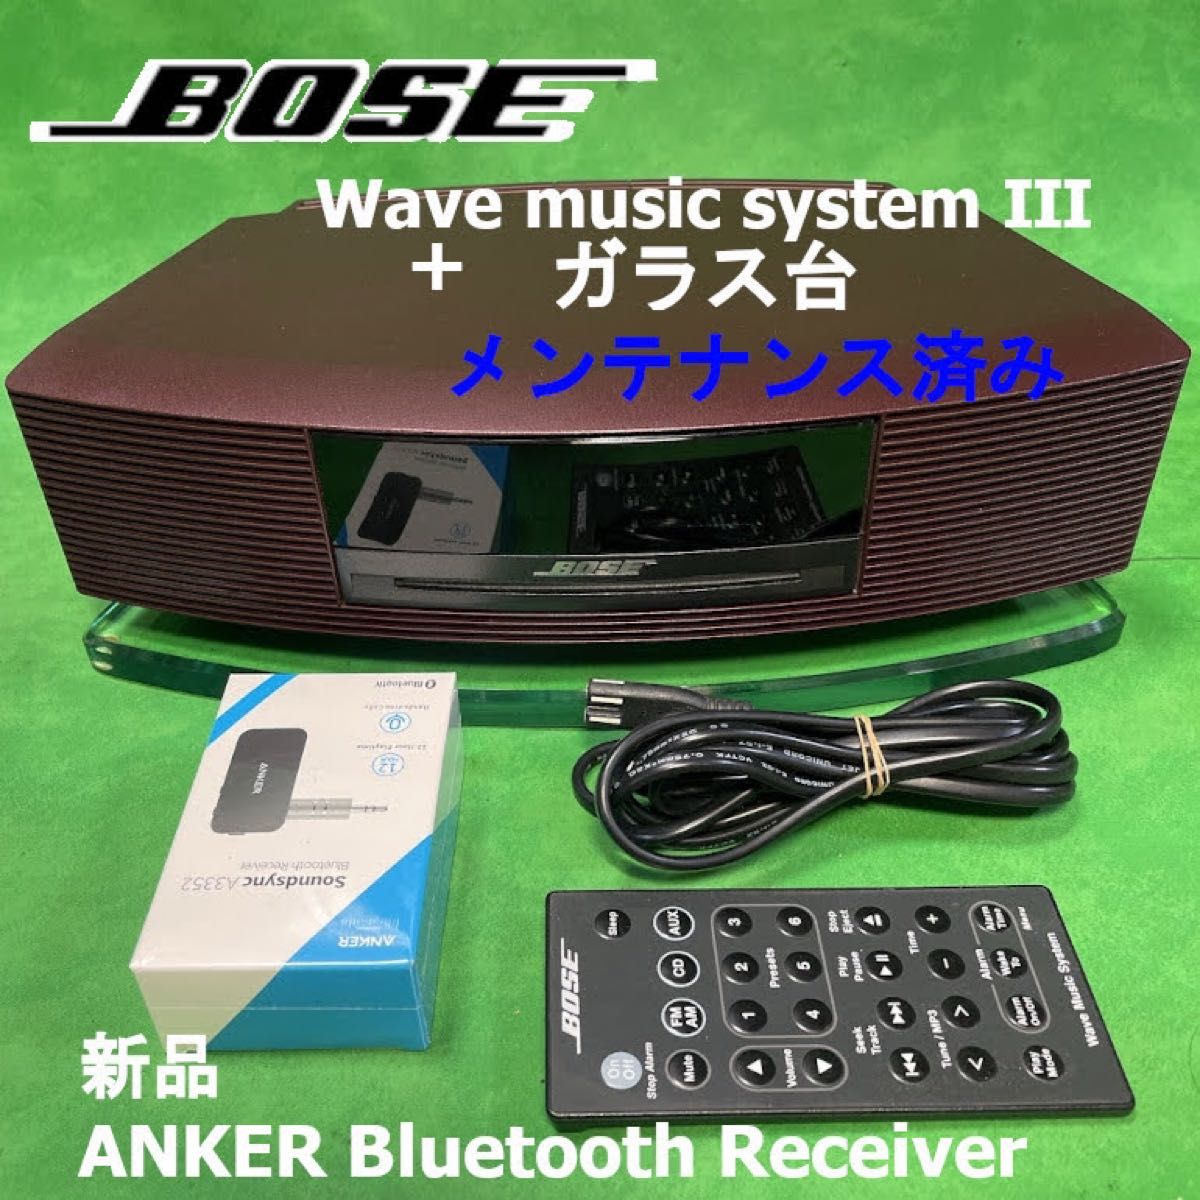 BOSE Wave music system Ⅲ オーディオプレーヤーガラス台付-